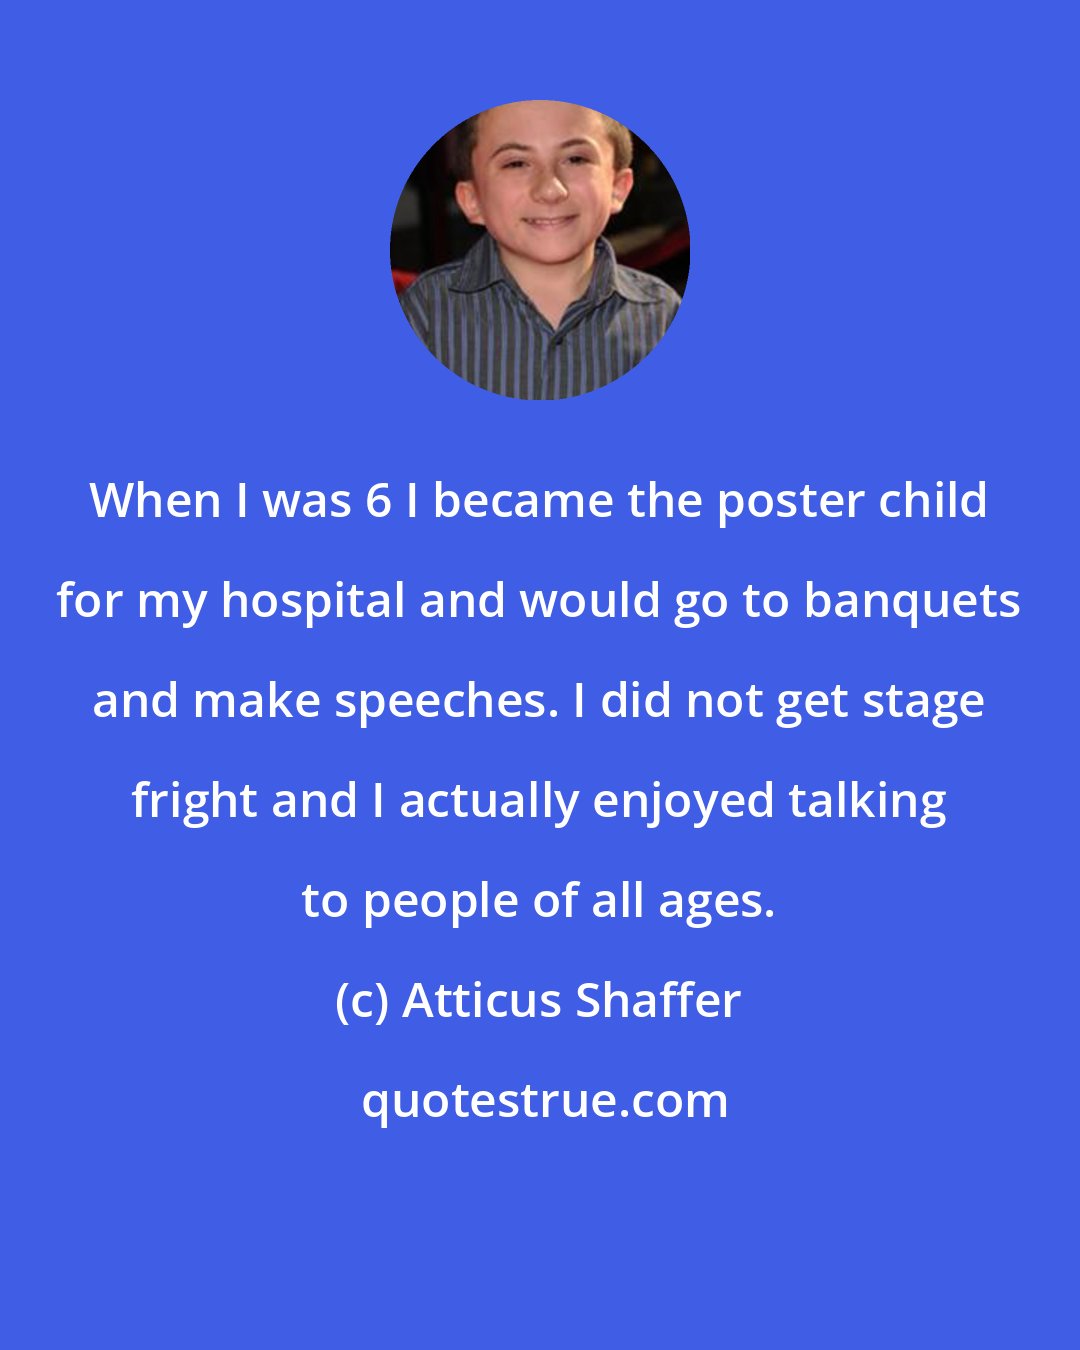 Atticus Shaffer: When I was 6 I became the poster child for my hospital and would go to banquets and make speeches. I did not get stage fright and I actually enjoyed talking to people of all ages.